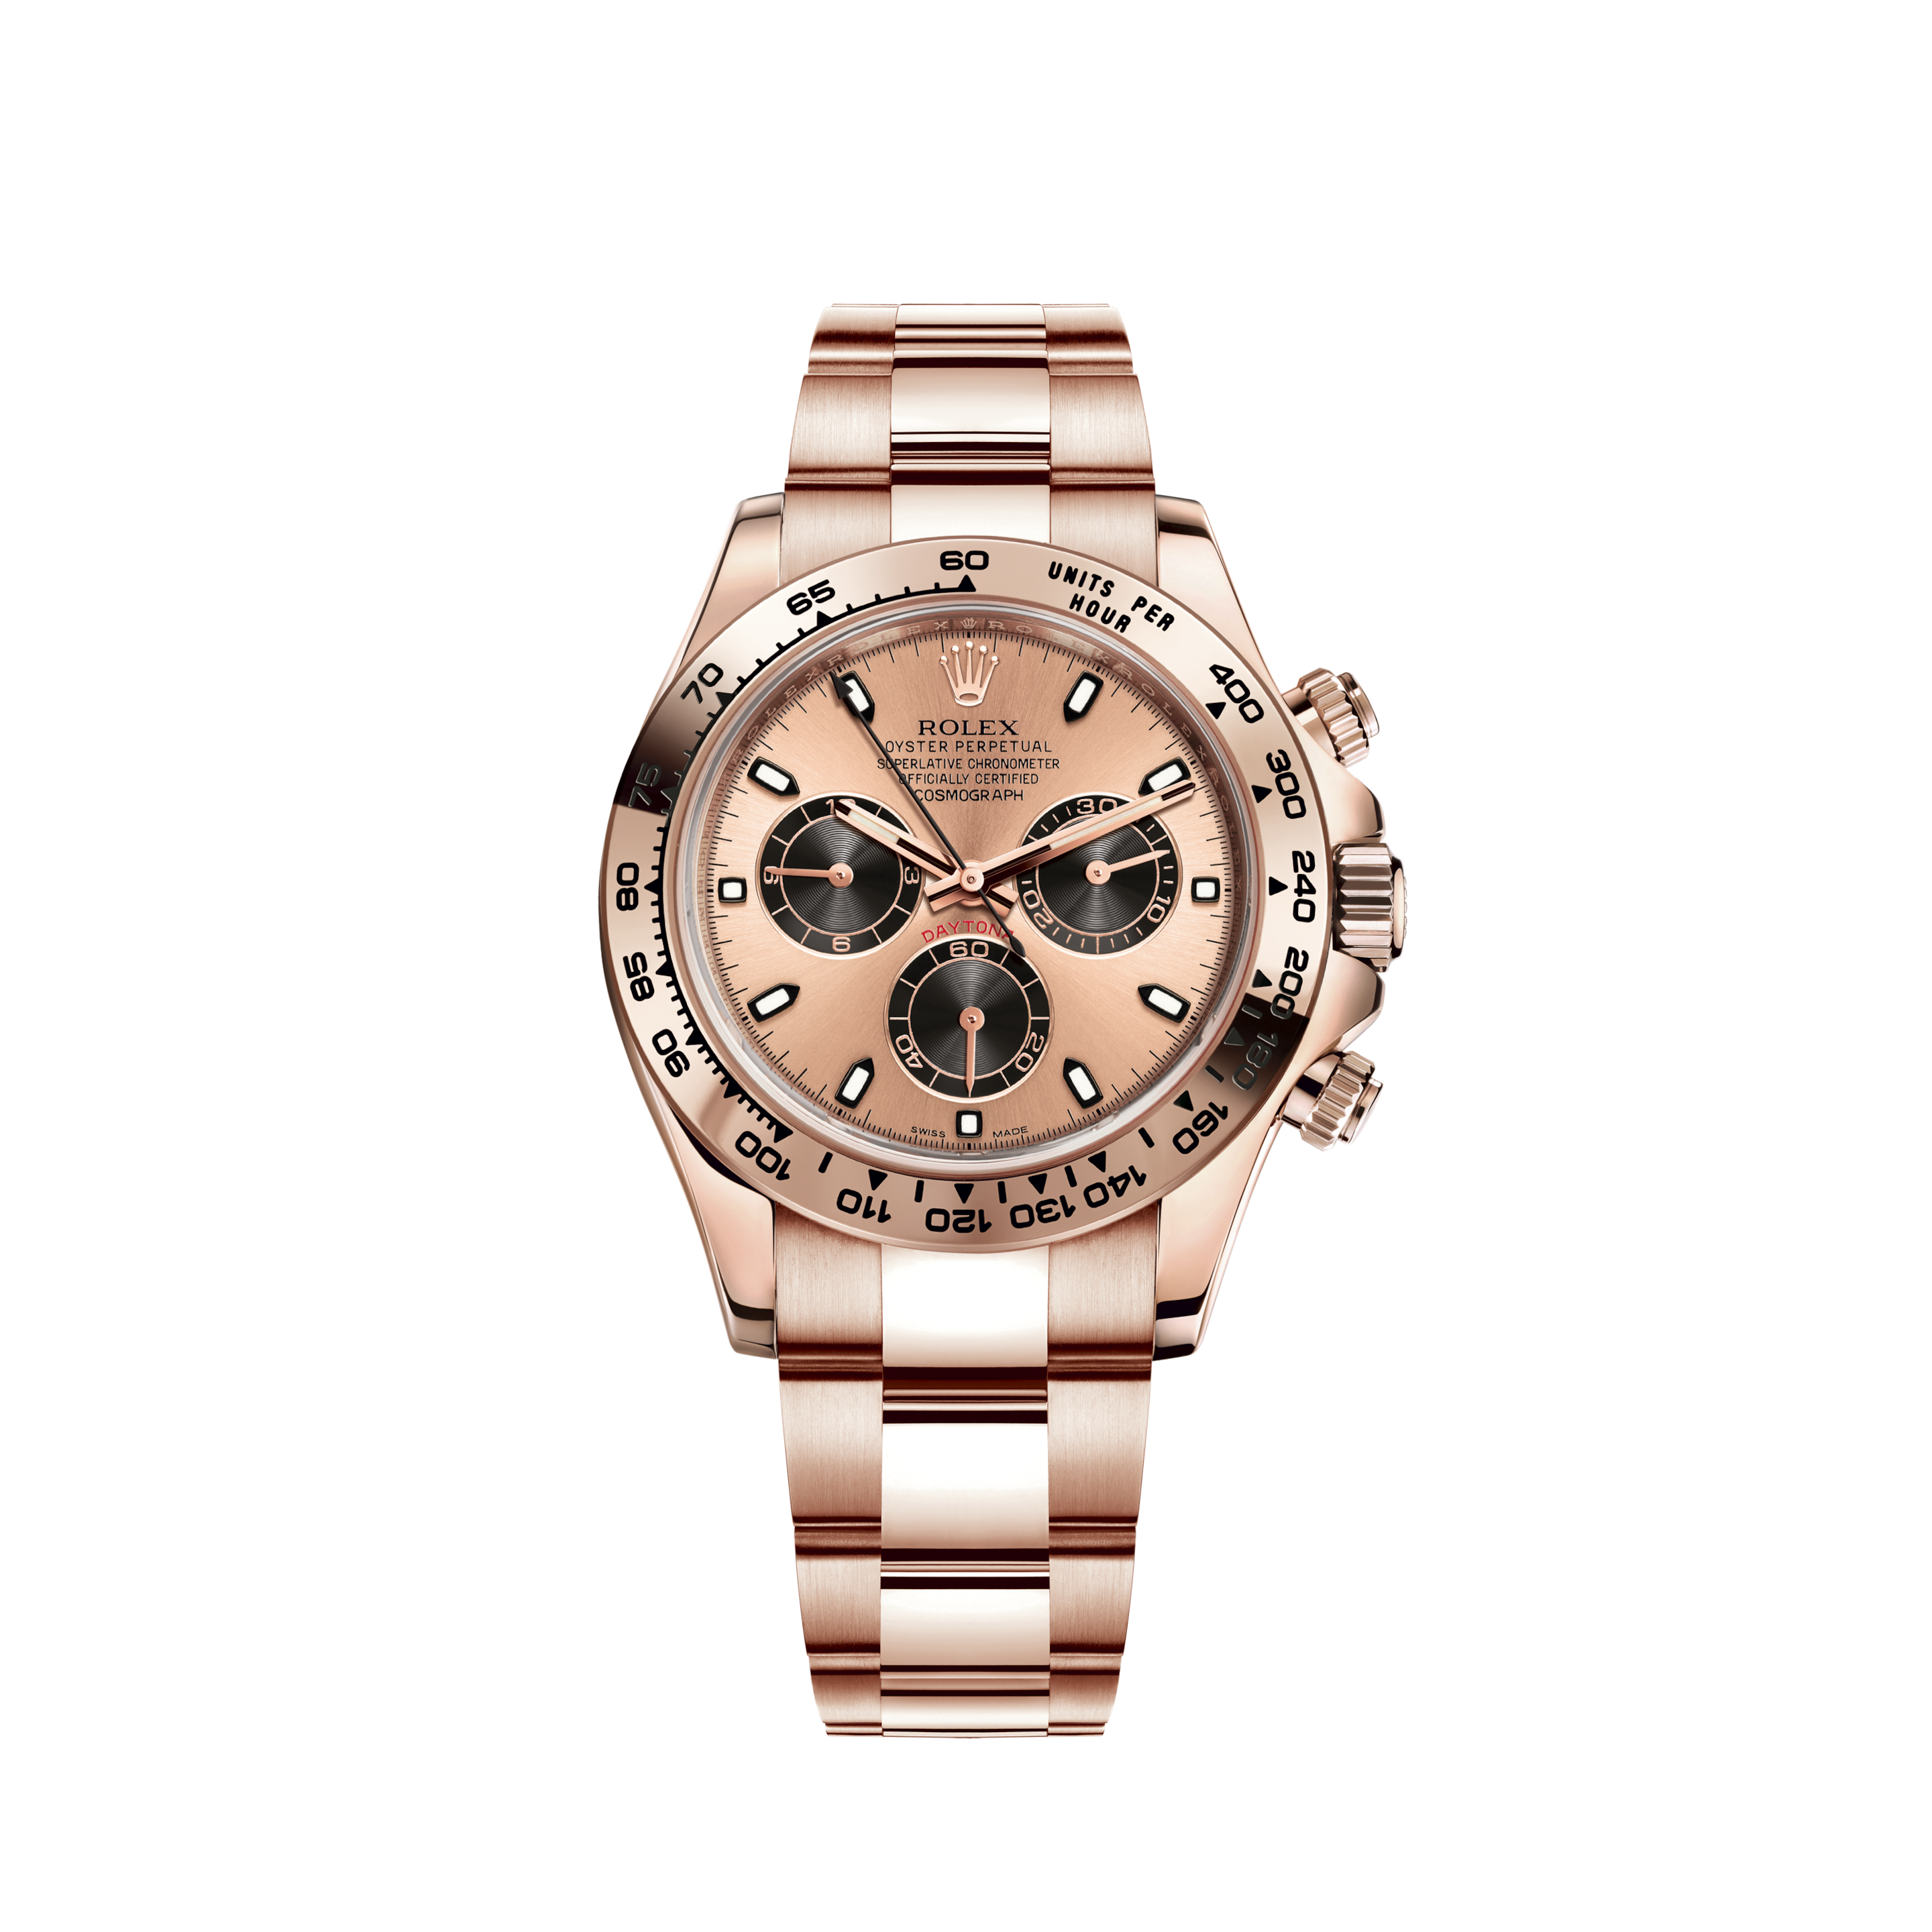 Rolex President Datejust 26mm 1.35ct Diamond Bezel/Baby Pink Dial Gold WatchRolex Oyster Perpetual Datejust Rhodium Dial Automatic Men's Watch - 126300